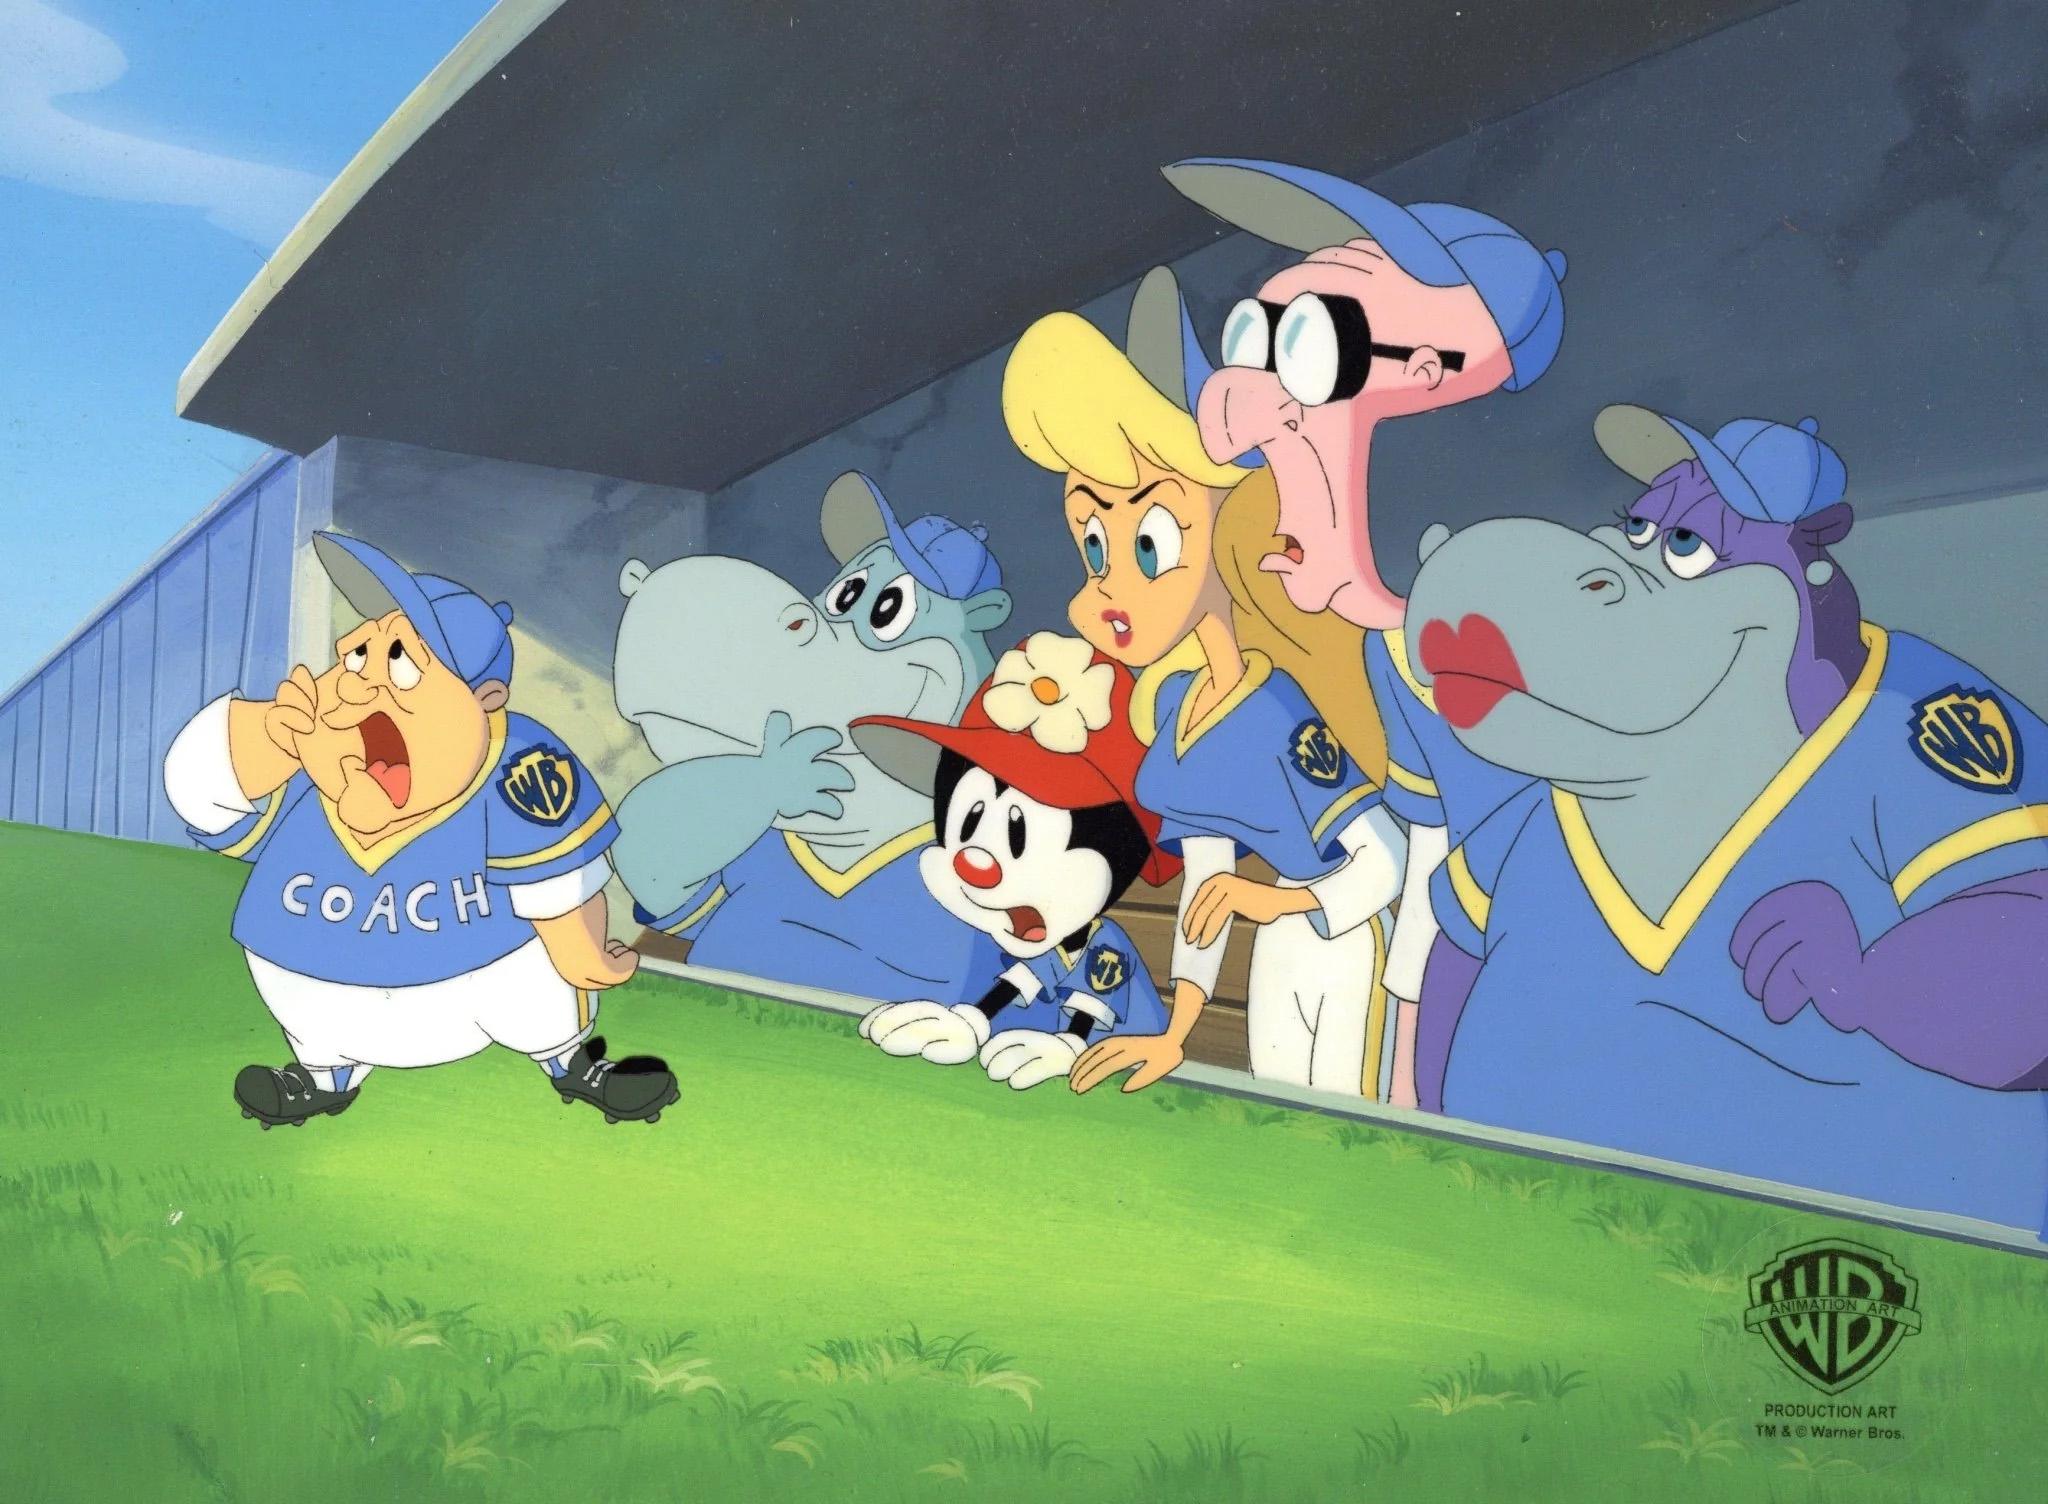 Animaniacs Original Production Cel on Original Background: Coach and The Team  - Art by Warner Bros. Studio Artists